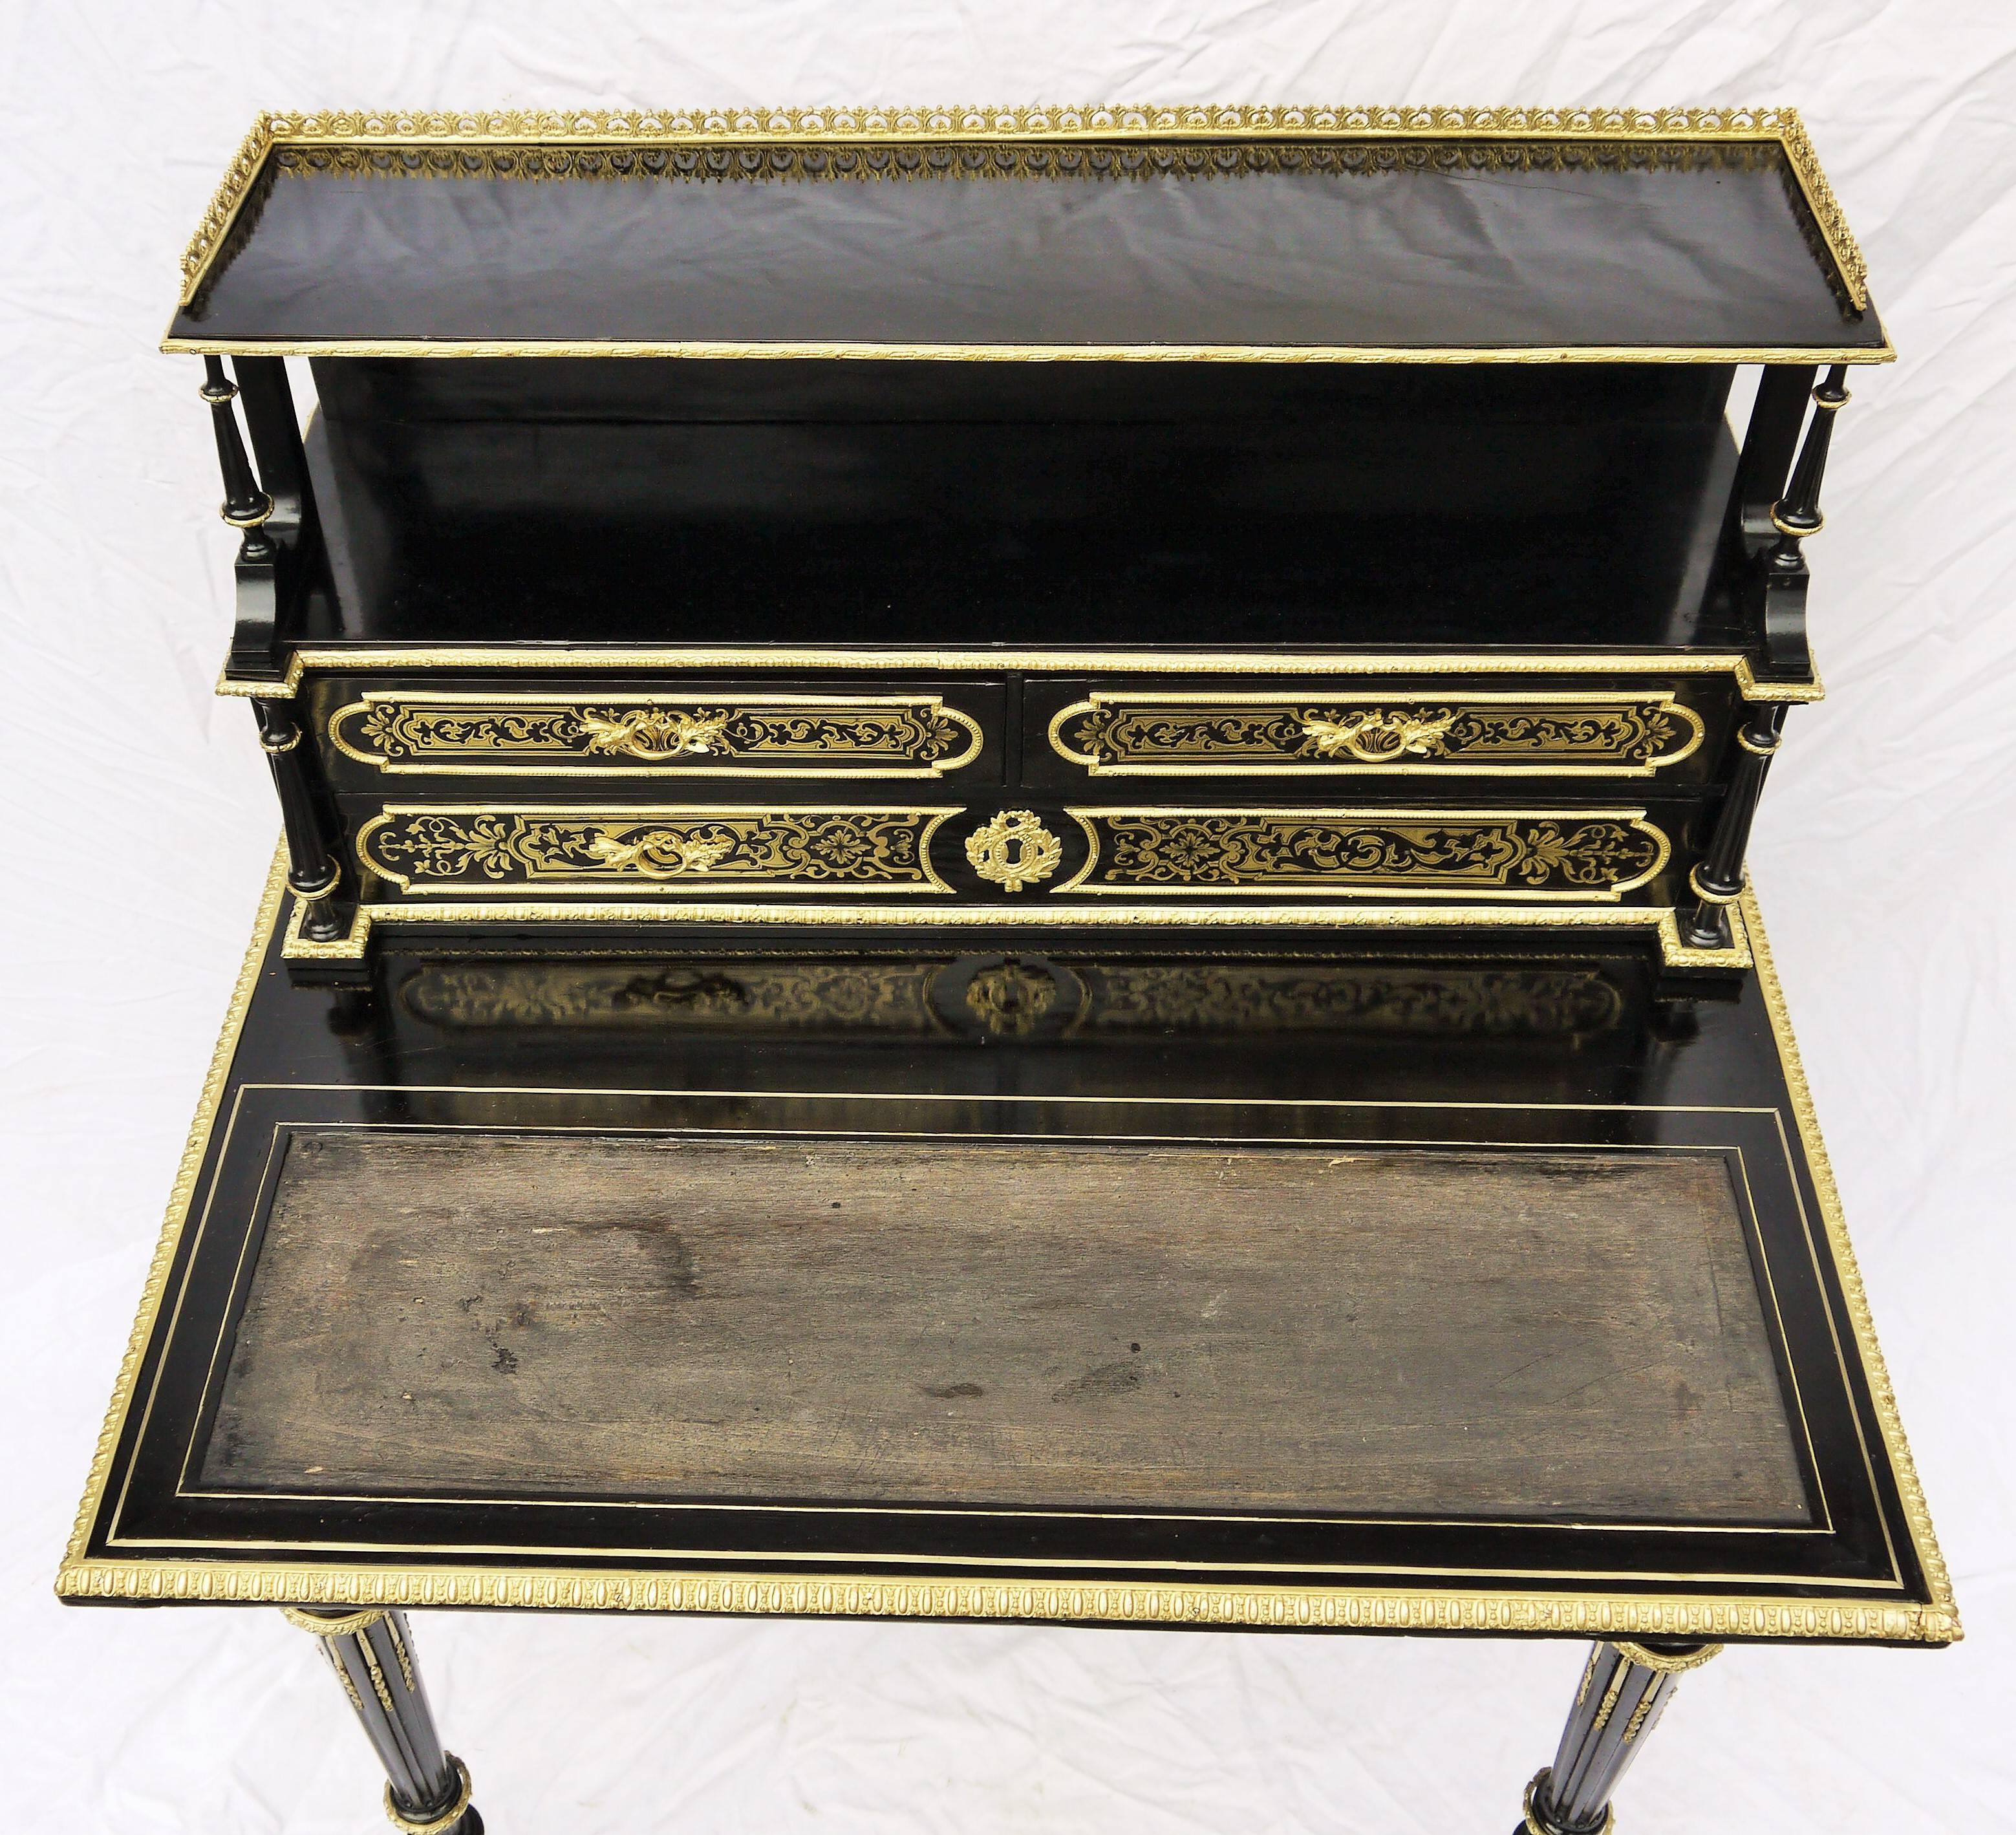 Unique, rare French bureau à gradins desk, Boulle style marquetry with brass on the drawers.
Many delicate bronze adornments everywhere that adds elegance and beauty, even on the small columns. A spacious facade drawer and three other ones on the